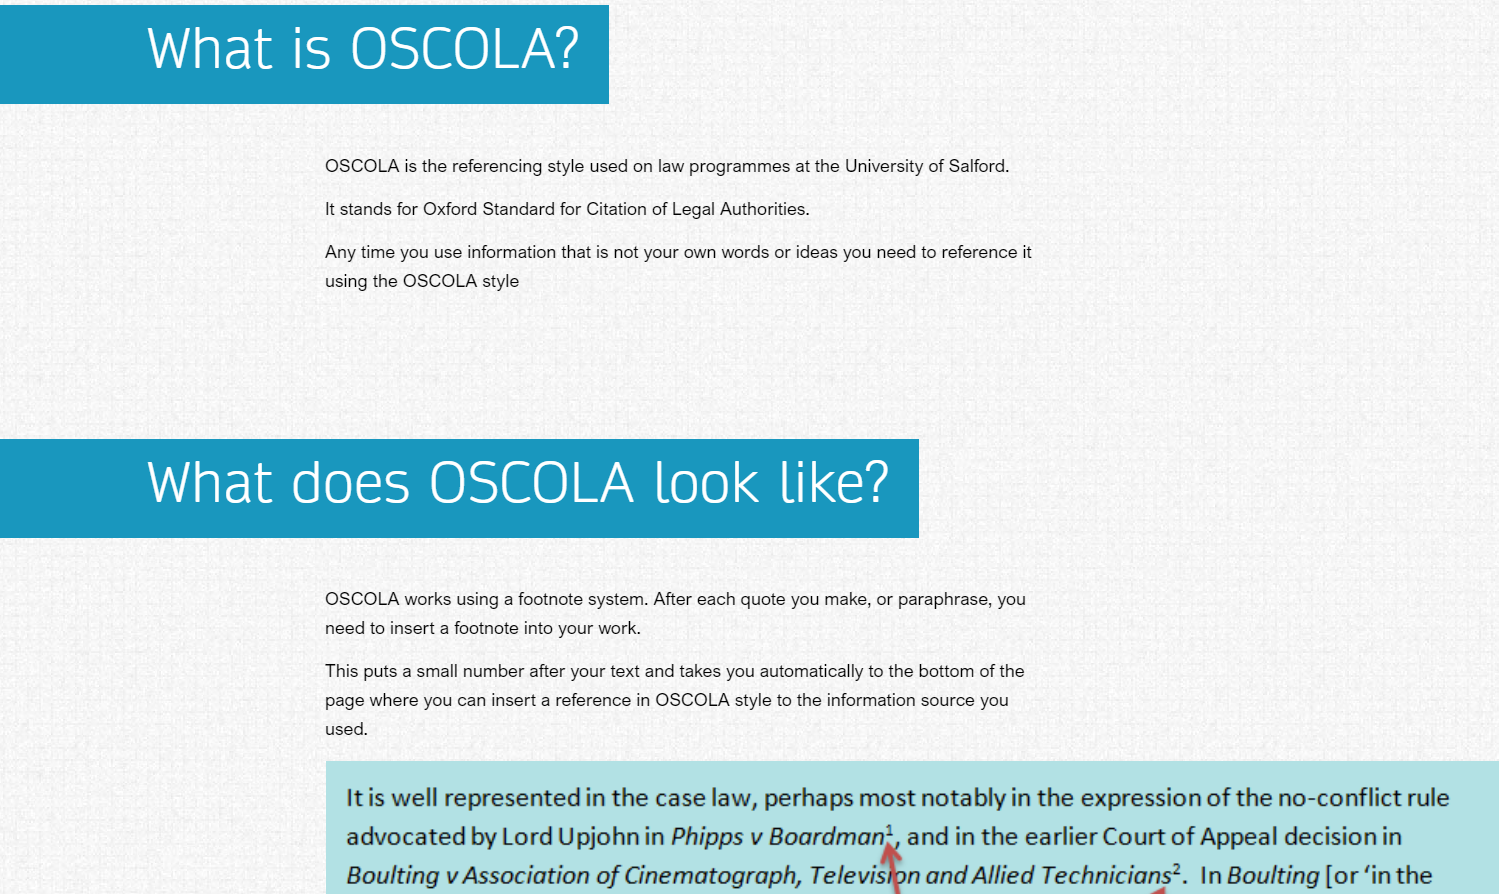 how to reference research briefing oscola